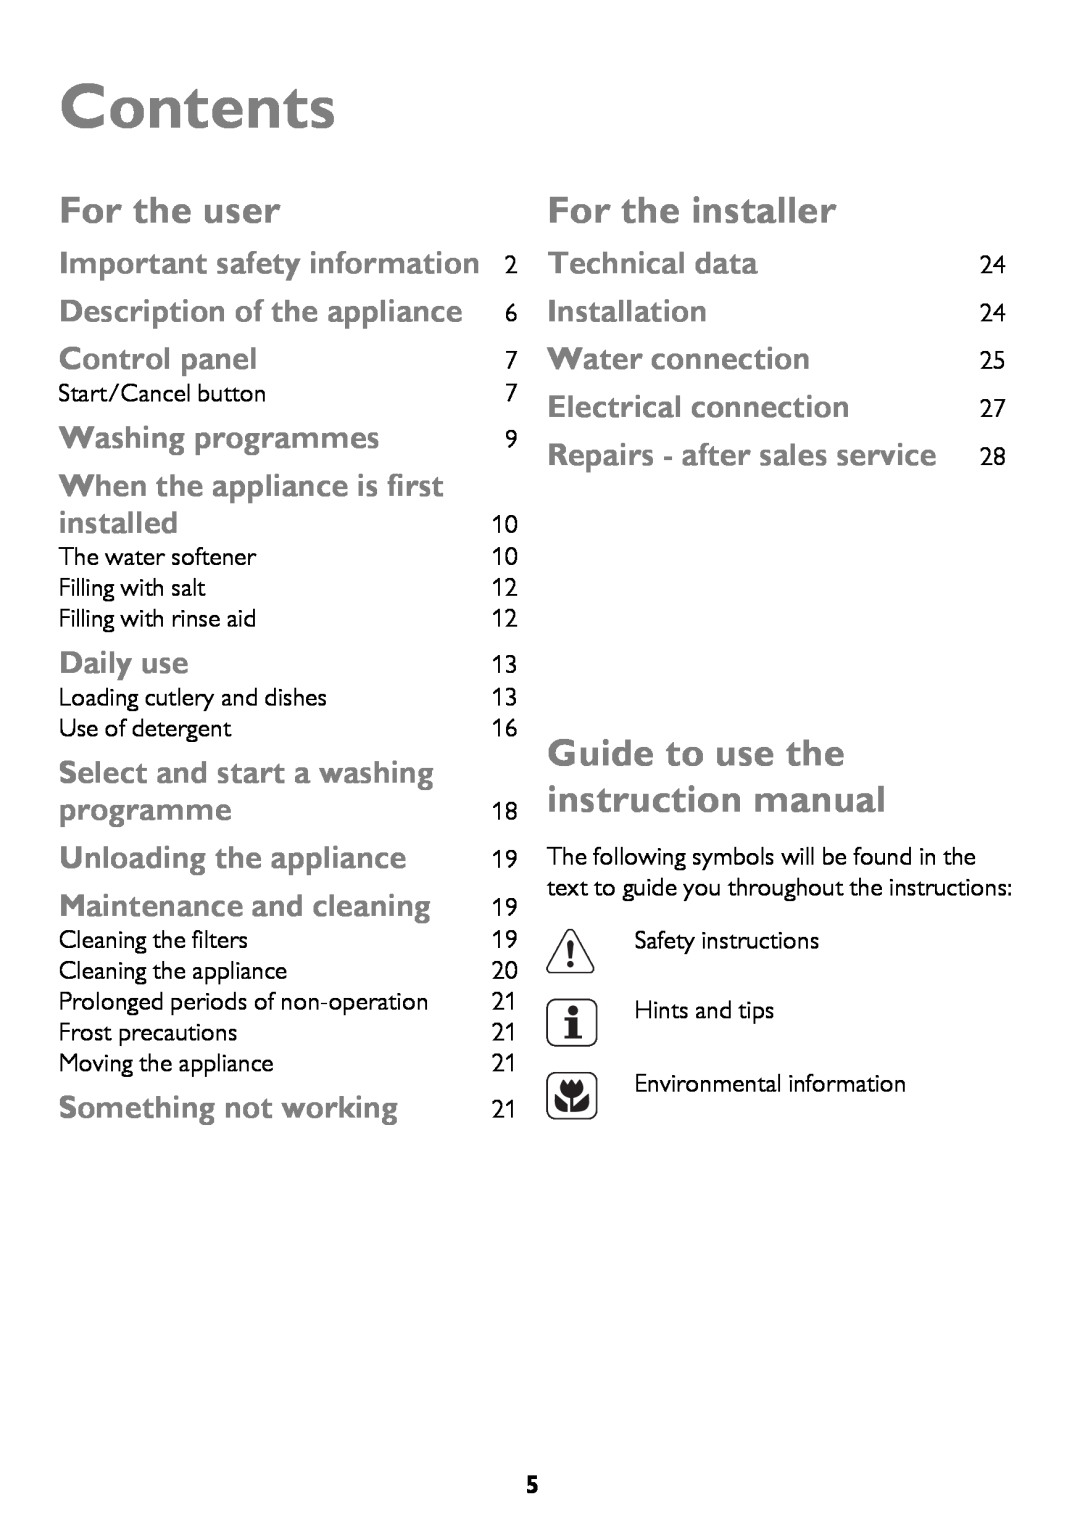 John Lewis JLBIDW 1201 Contents, For the user, For the installer, 16Guide to use the 18instruction manual 